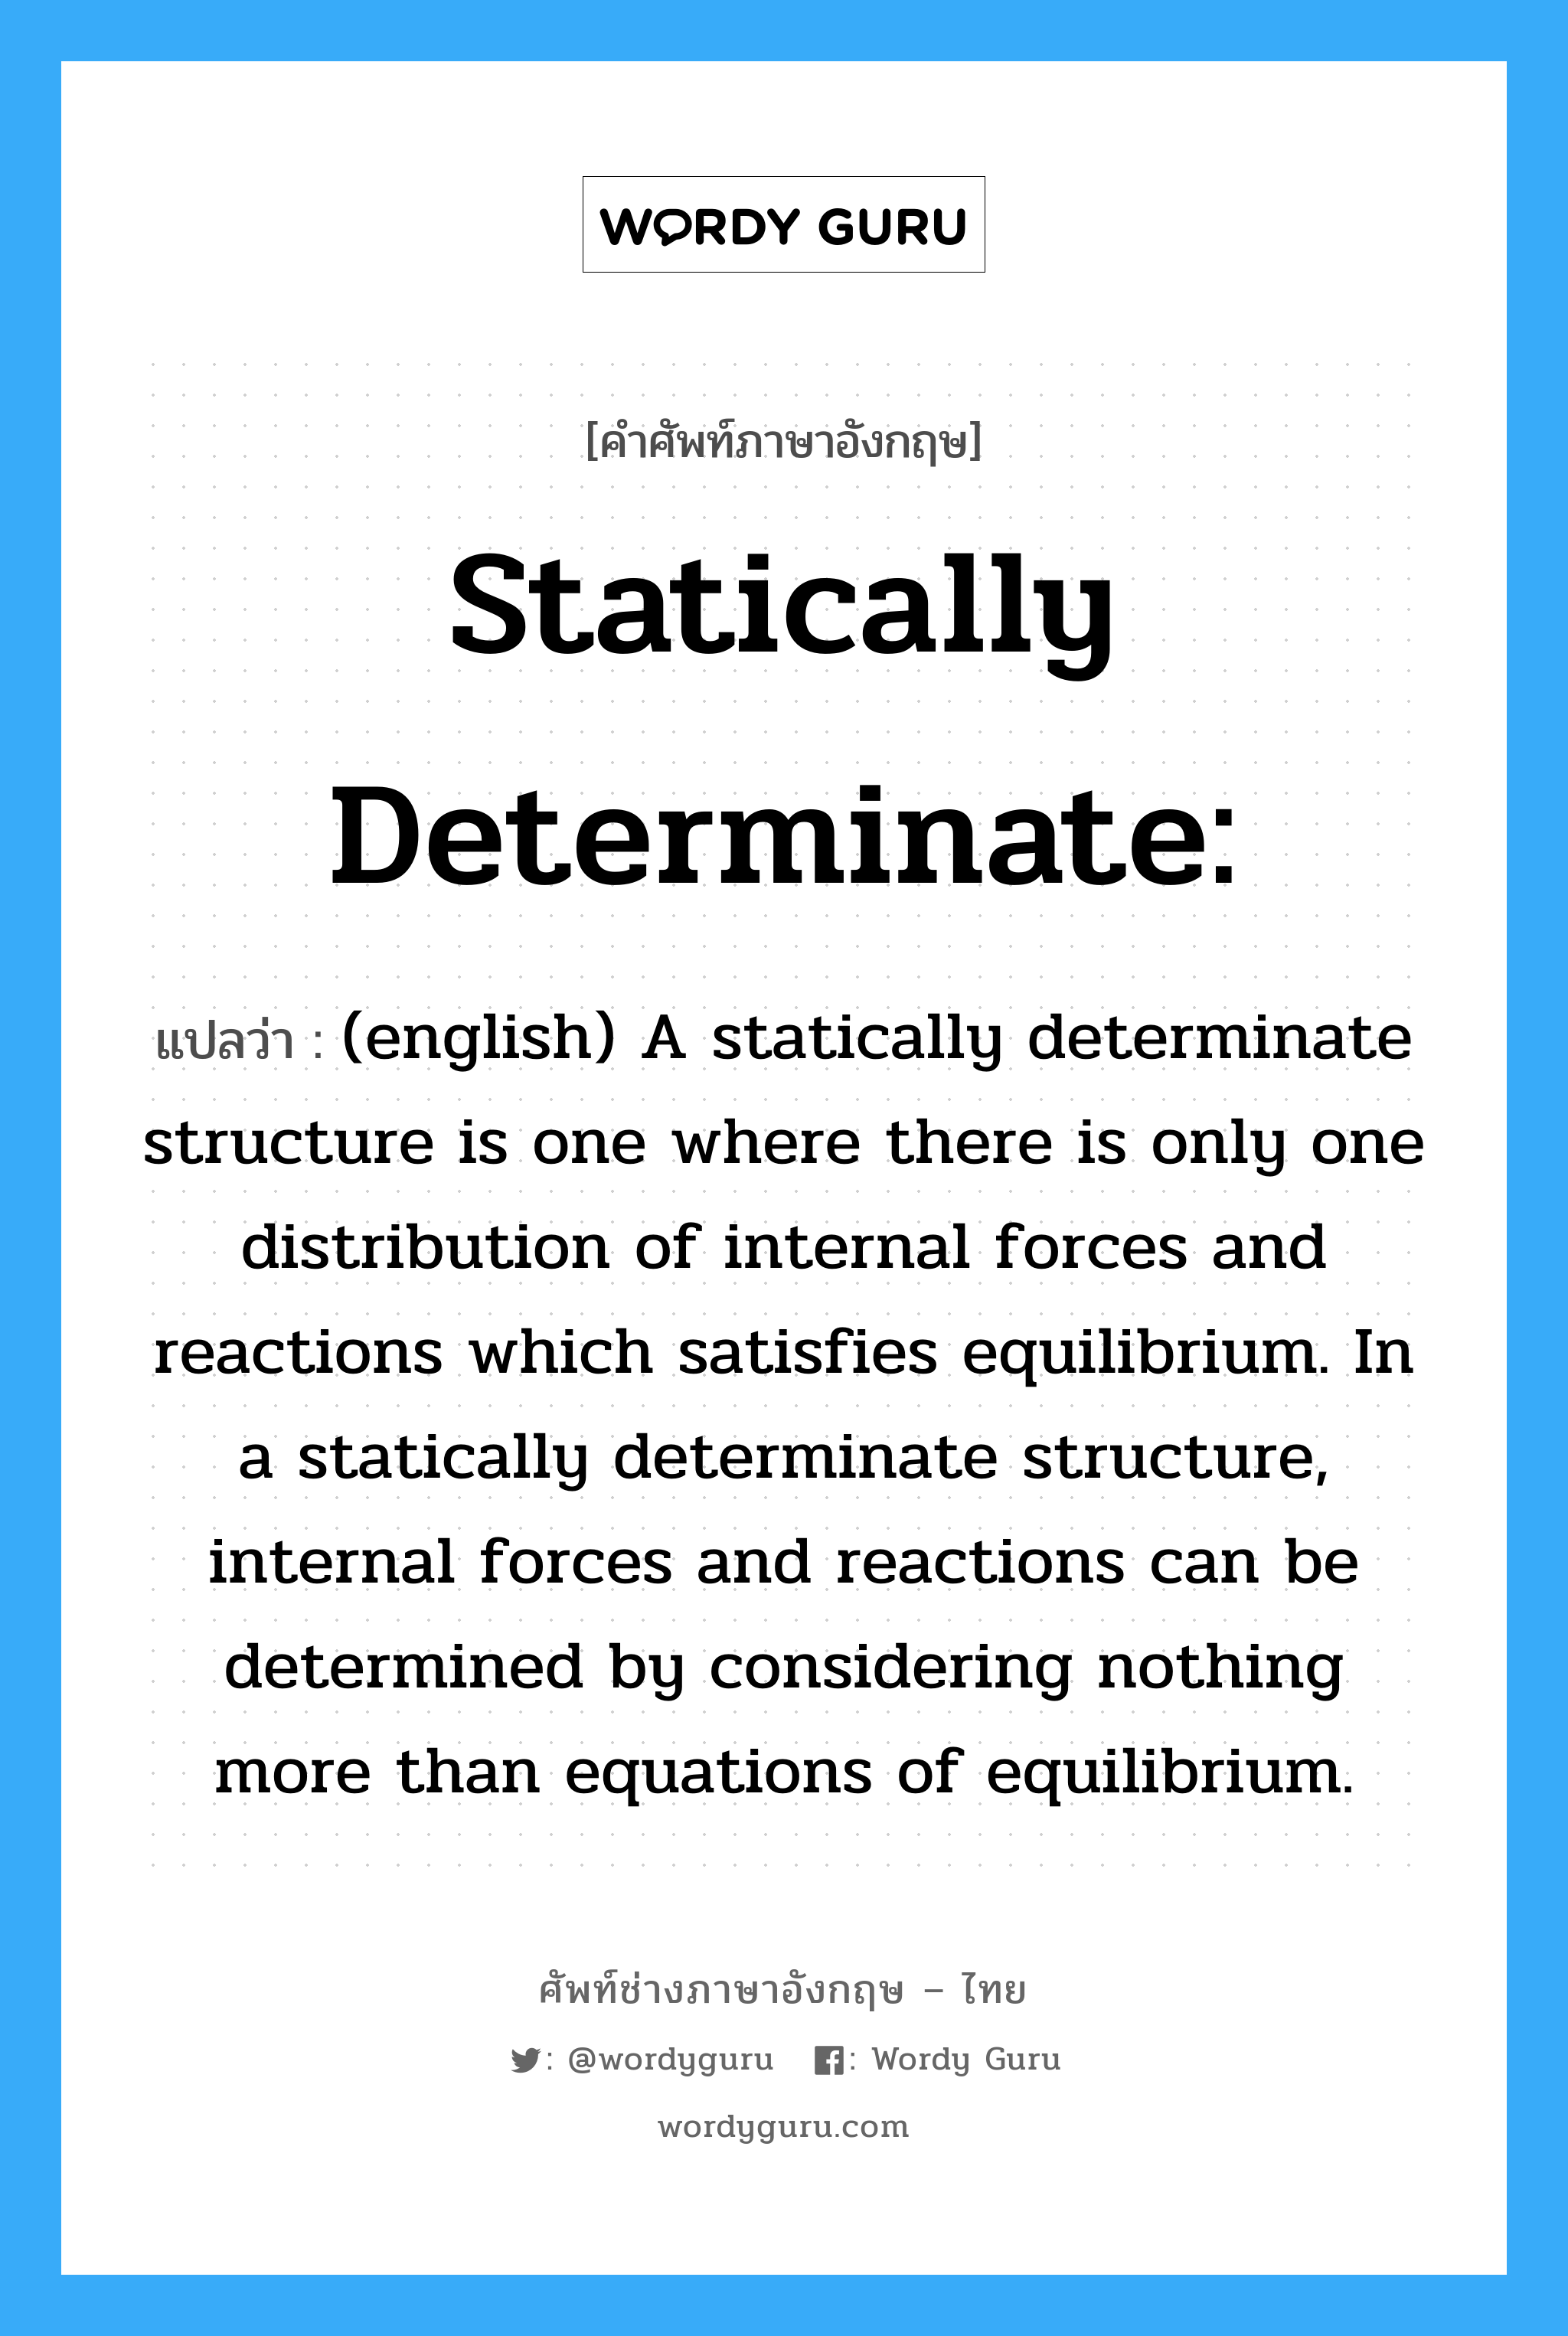 Statically determinate: แปลว่า?, คำศัพท์ช่างภาษาอังกฤษ - ไทย Statically determinate: คำศัพท์ภาษาอังกฤษ Statically determinate: แปลว่า (english) A statically determinate structure is one where there is only one distribution of internal forces and reactions which satisfies equilibrium. In a statically determinate structure, internal forces and reactions can be determined by considering nothing more than equations of equilibrium.